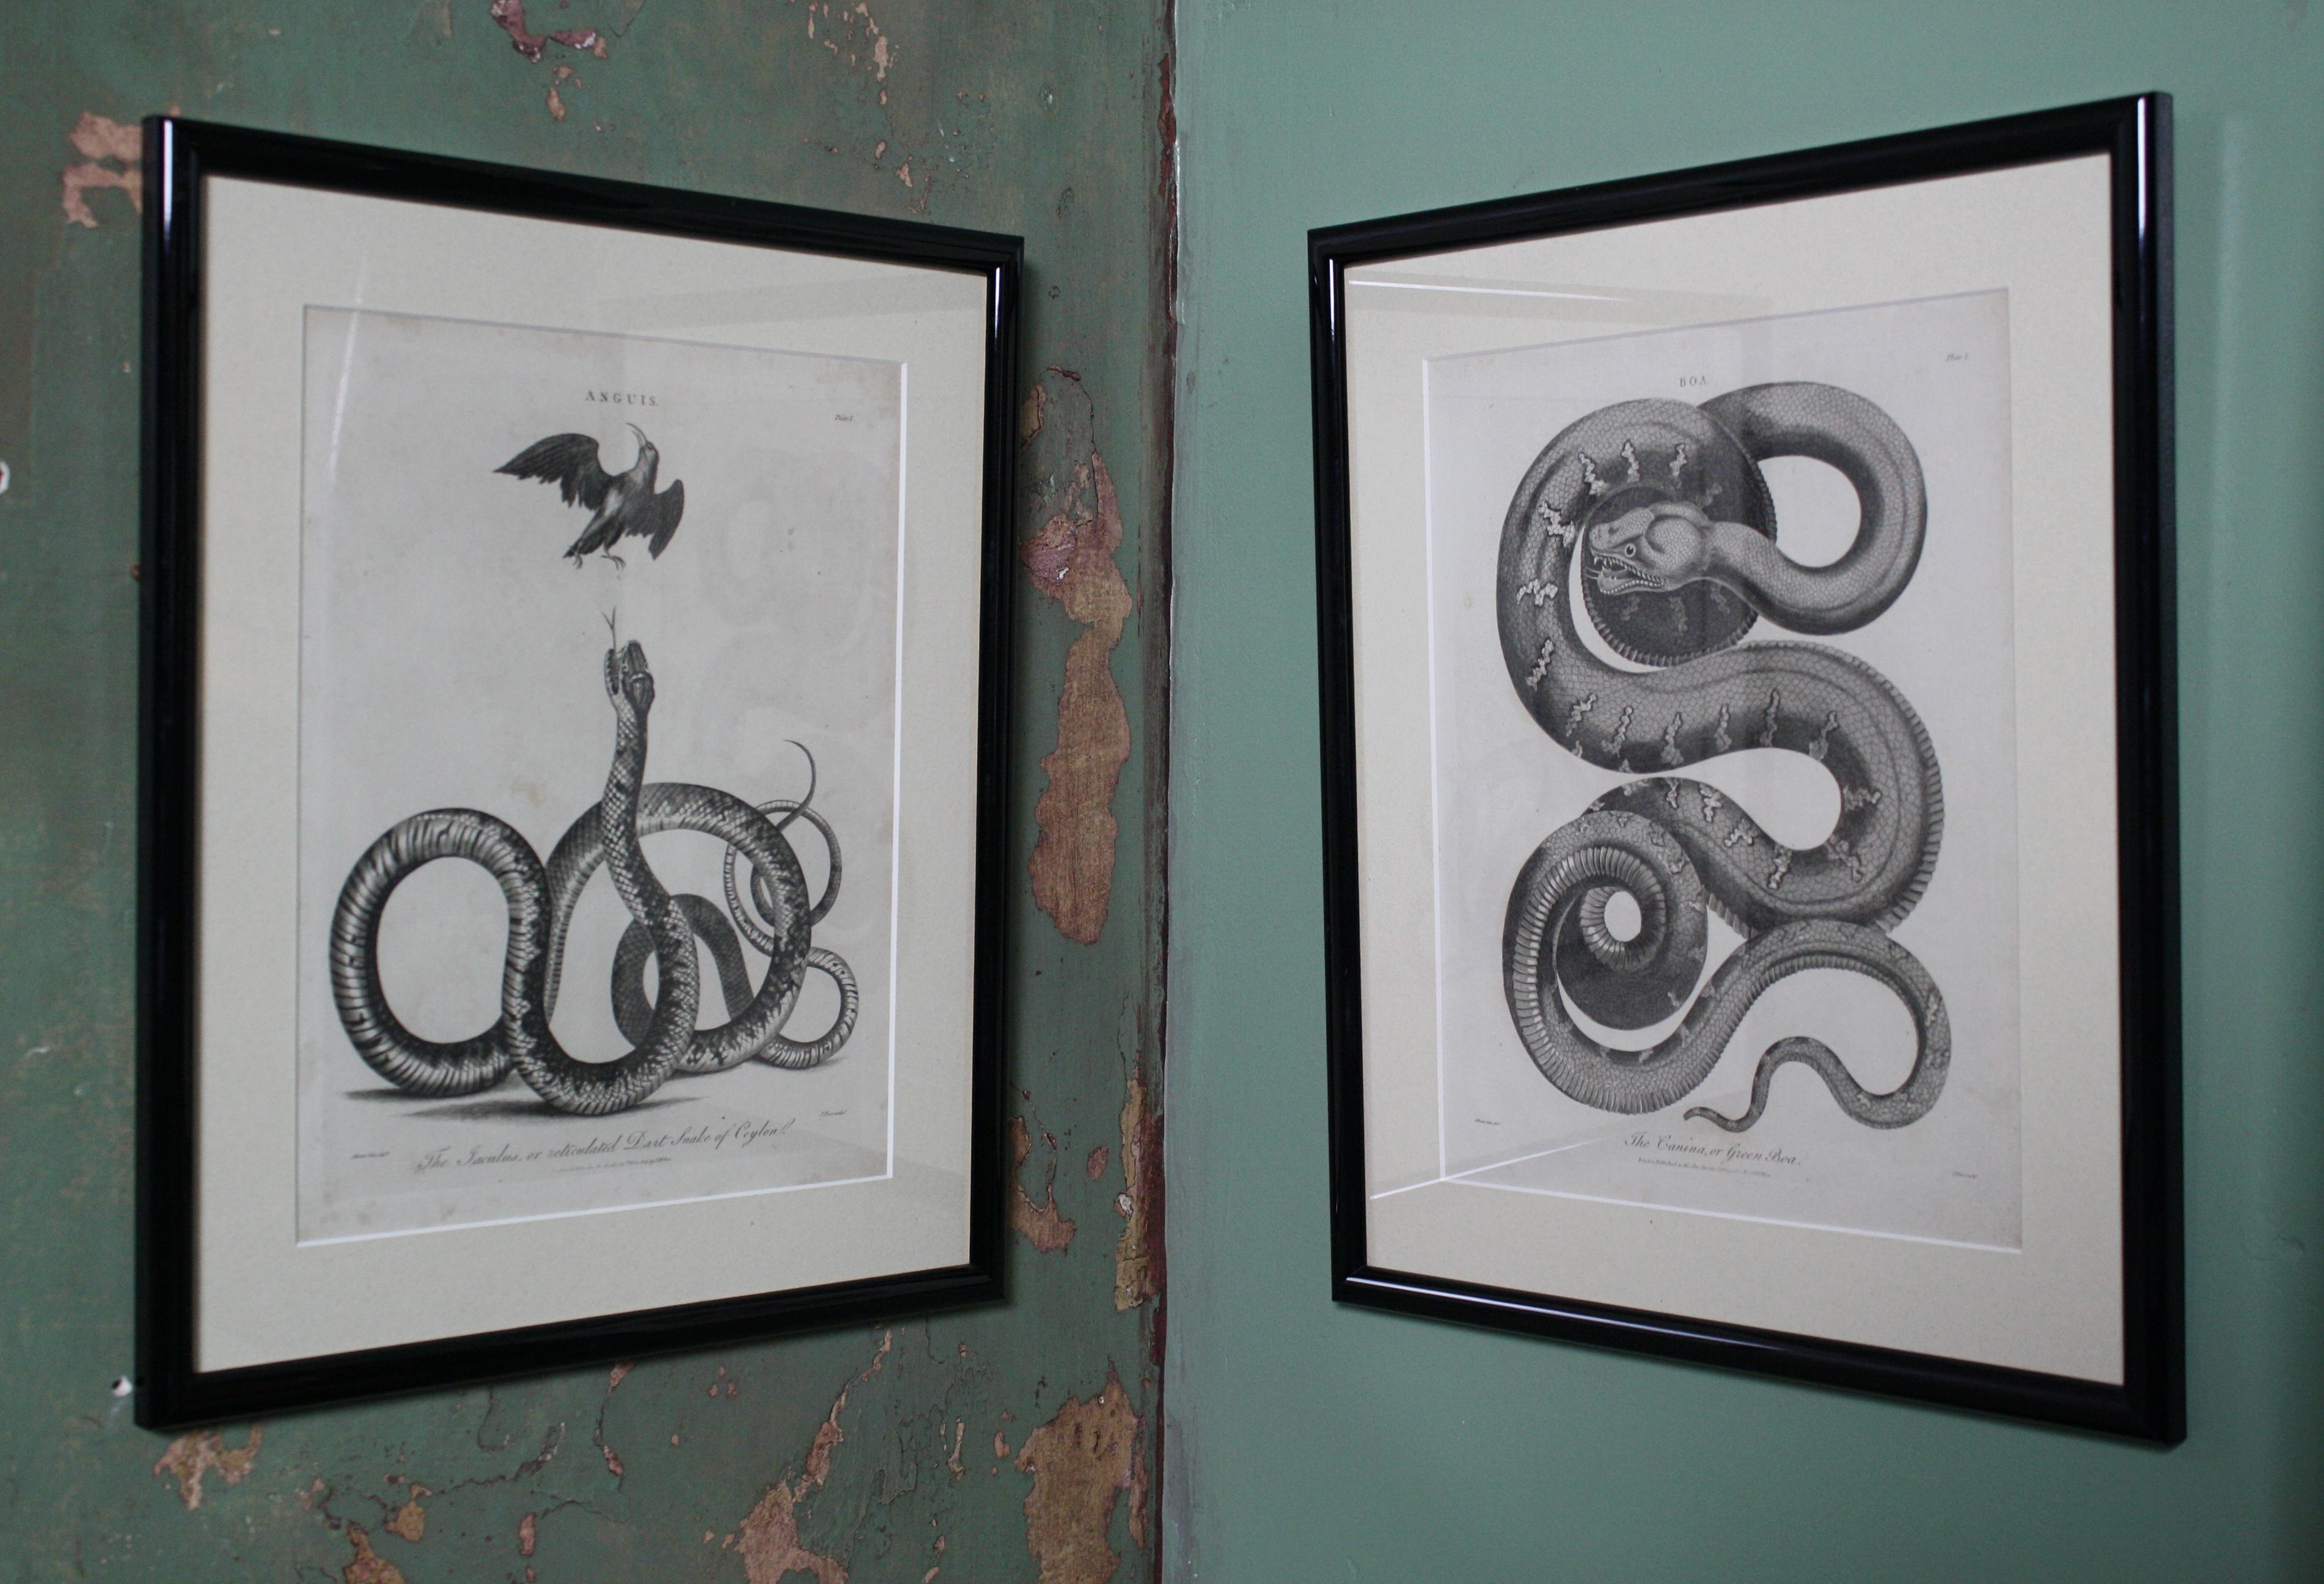 Collection of thirteen snake plates produced by Albertus Seba. The plates have been sympathetically framed in thin bull nose frames with a cream and blue flecked mount. These prints are likely to be from the second striking as dated 1802 31cm /